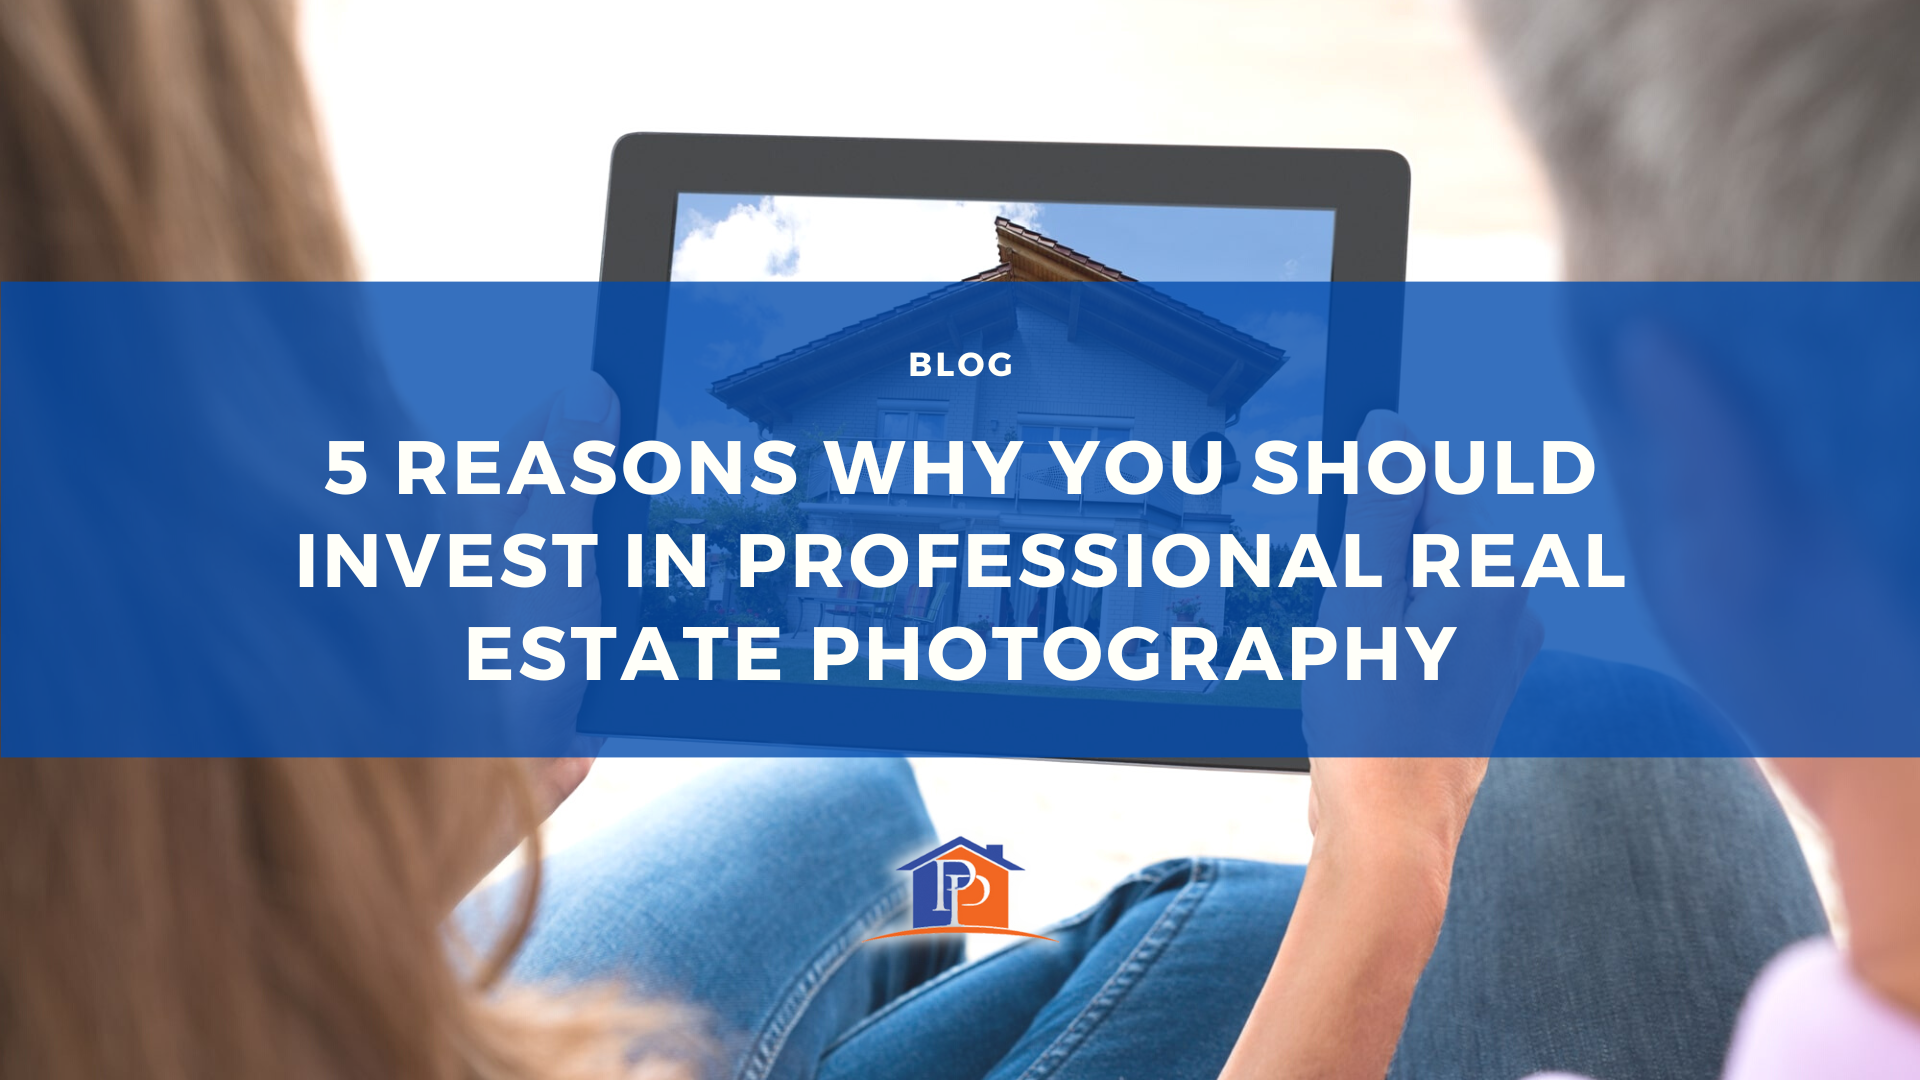 5 Reasons Why You Should Invest in Professional Real Estate Photography